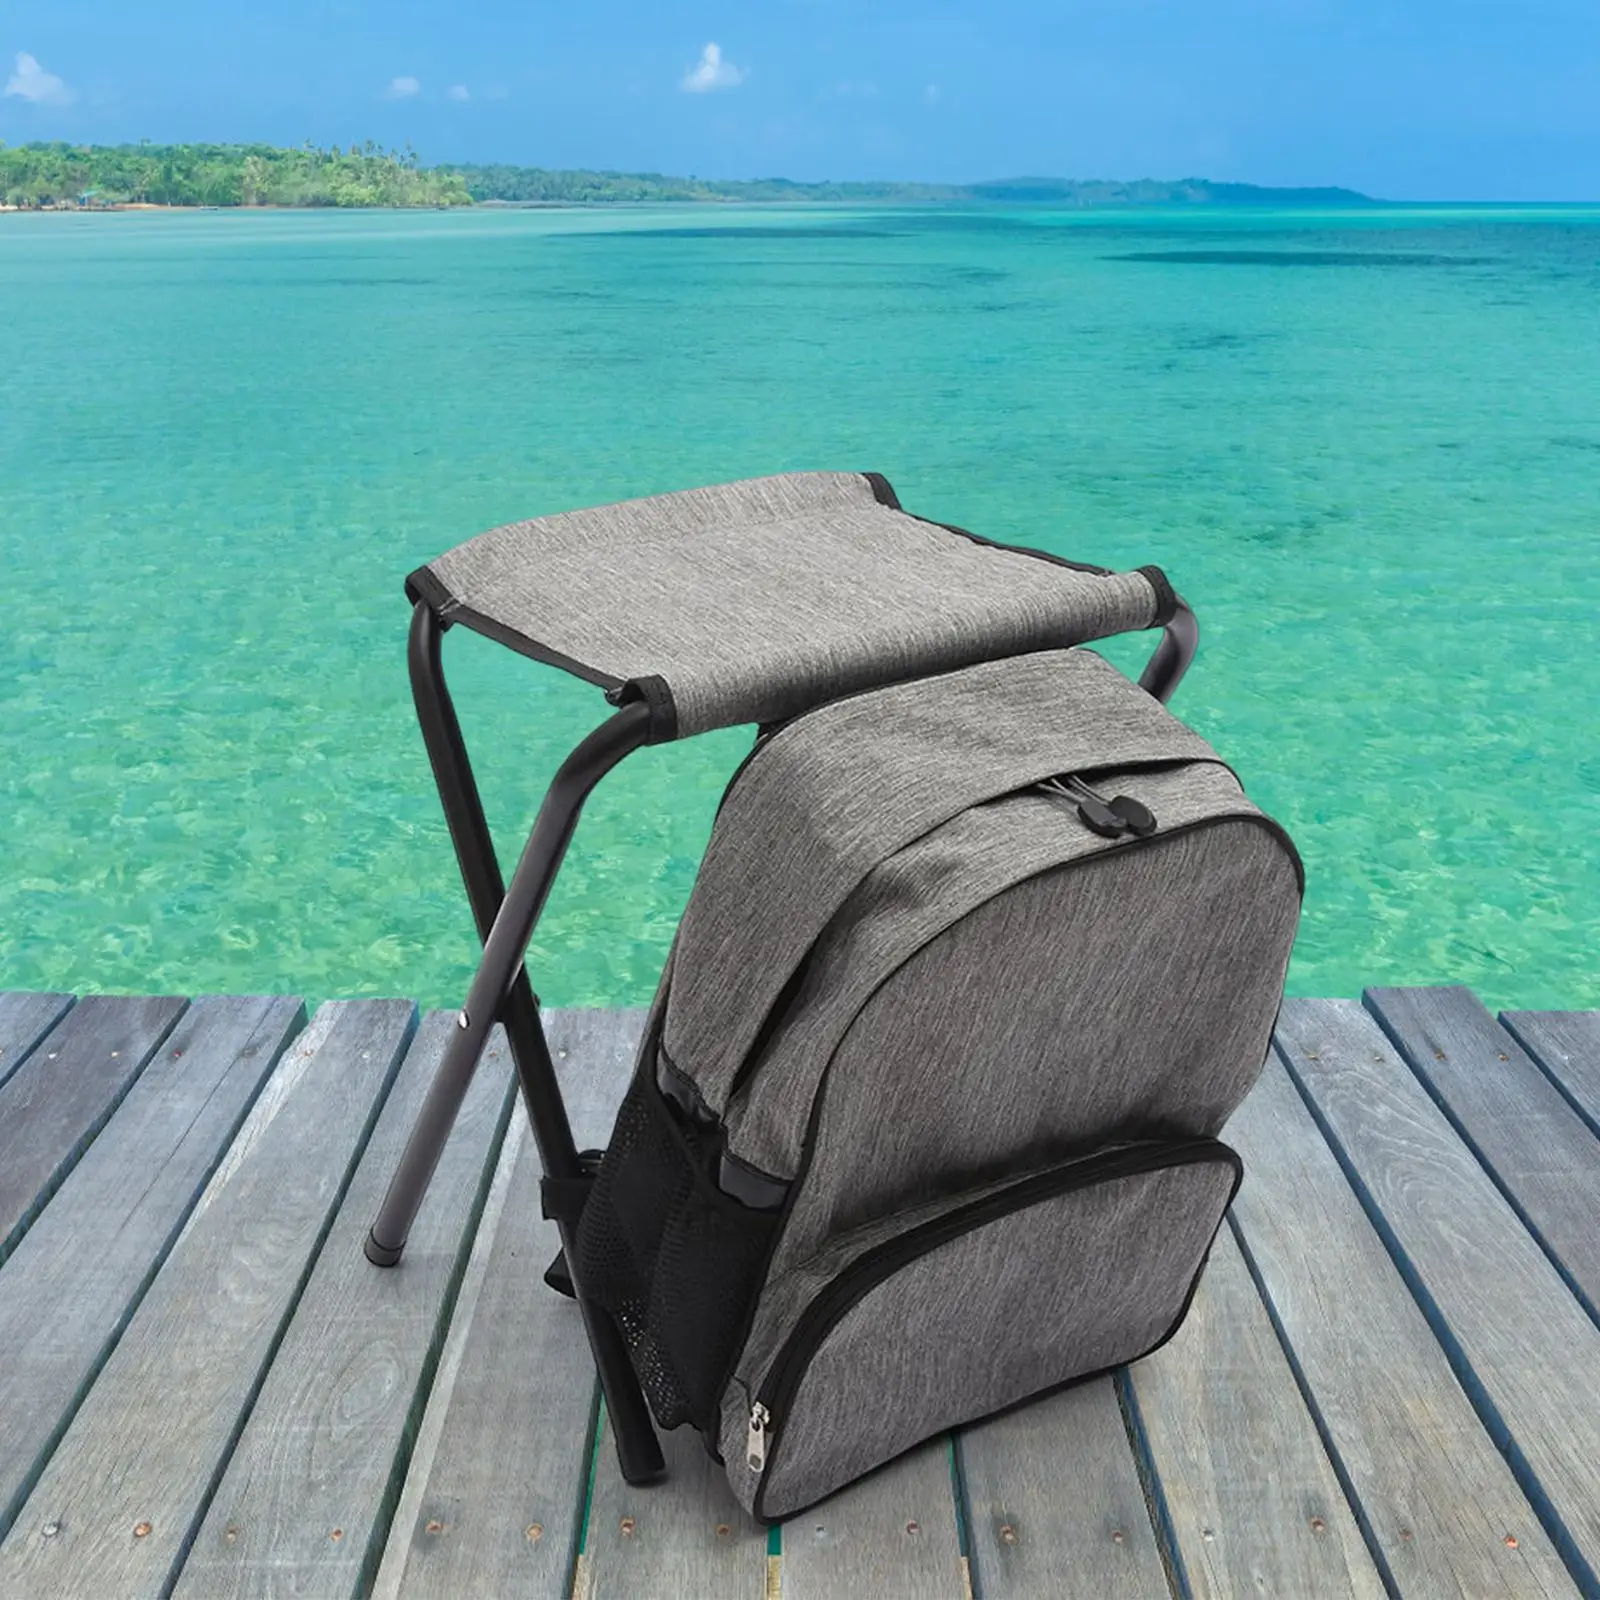 Fishing Seat Lightweight Outdoor Camping Hiking Chair for Beach Camping